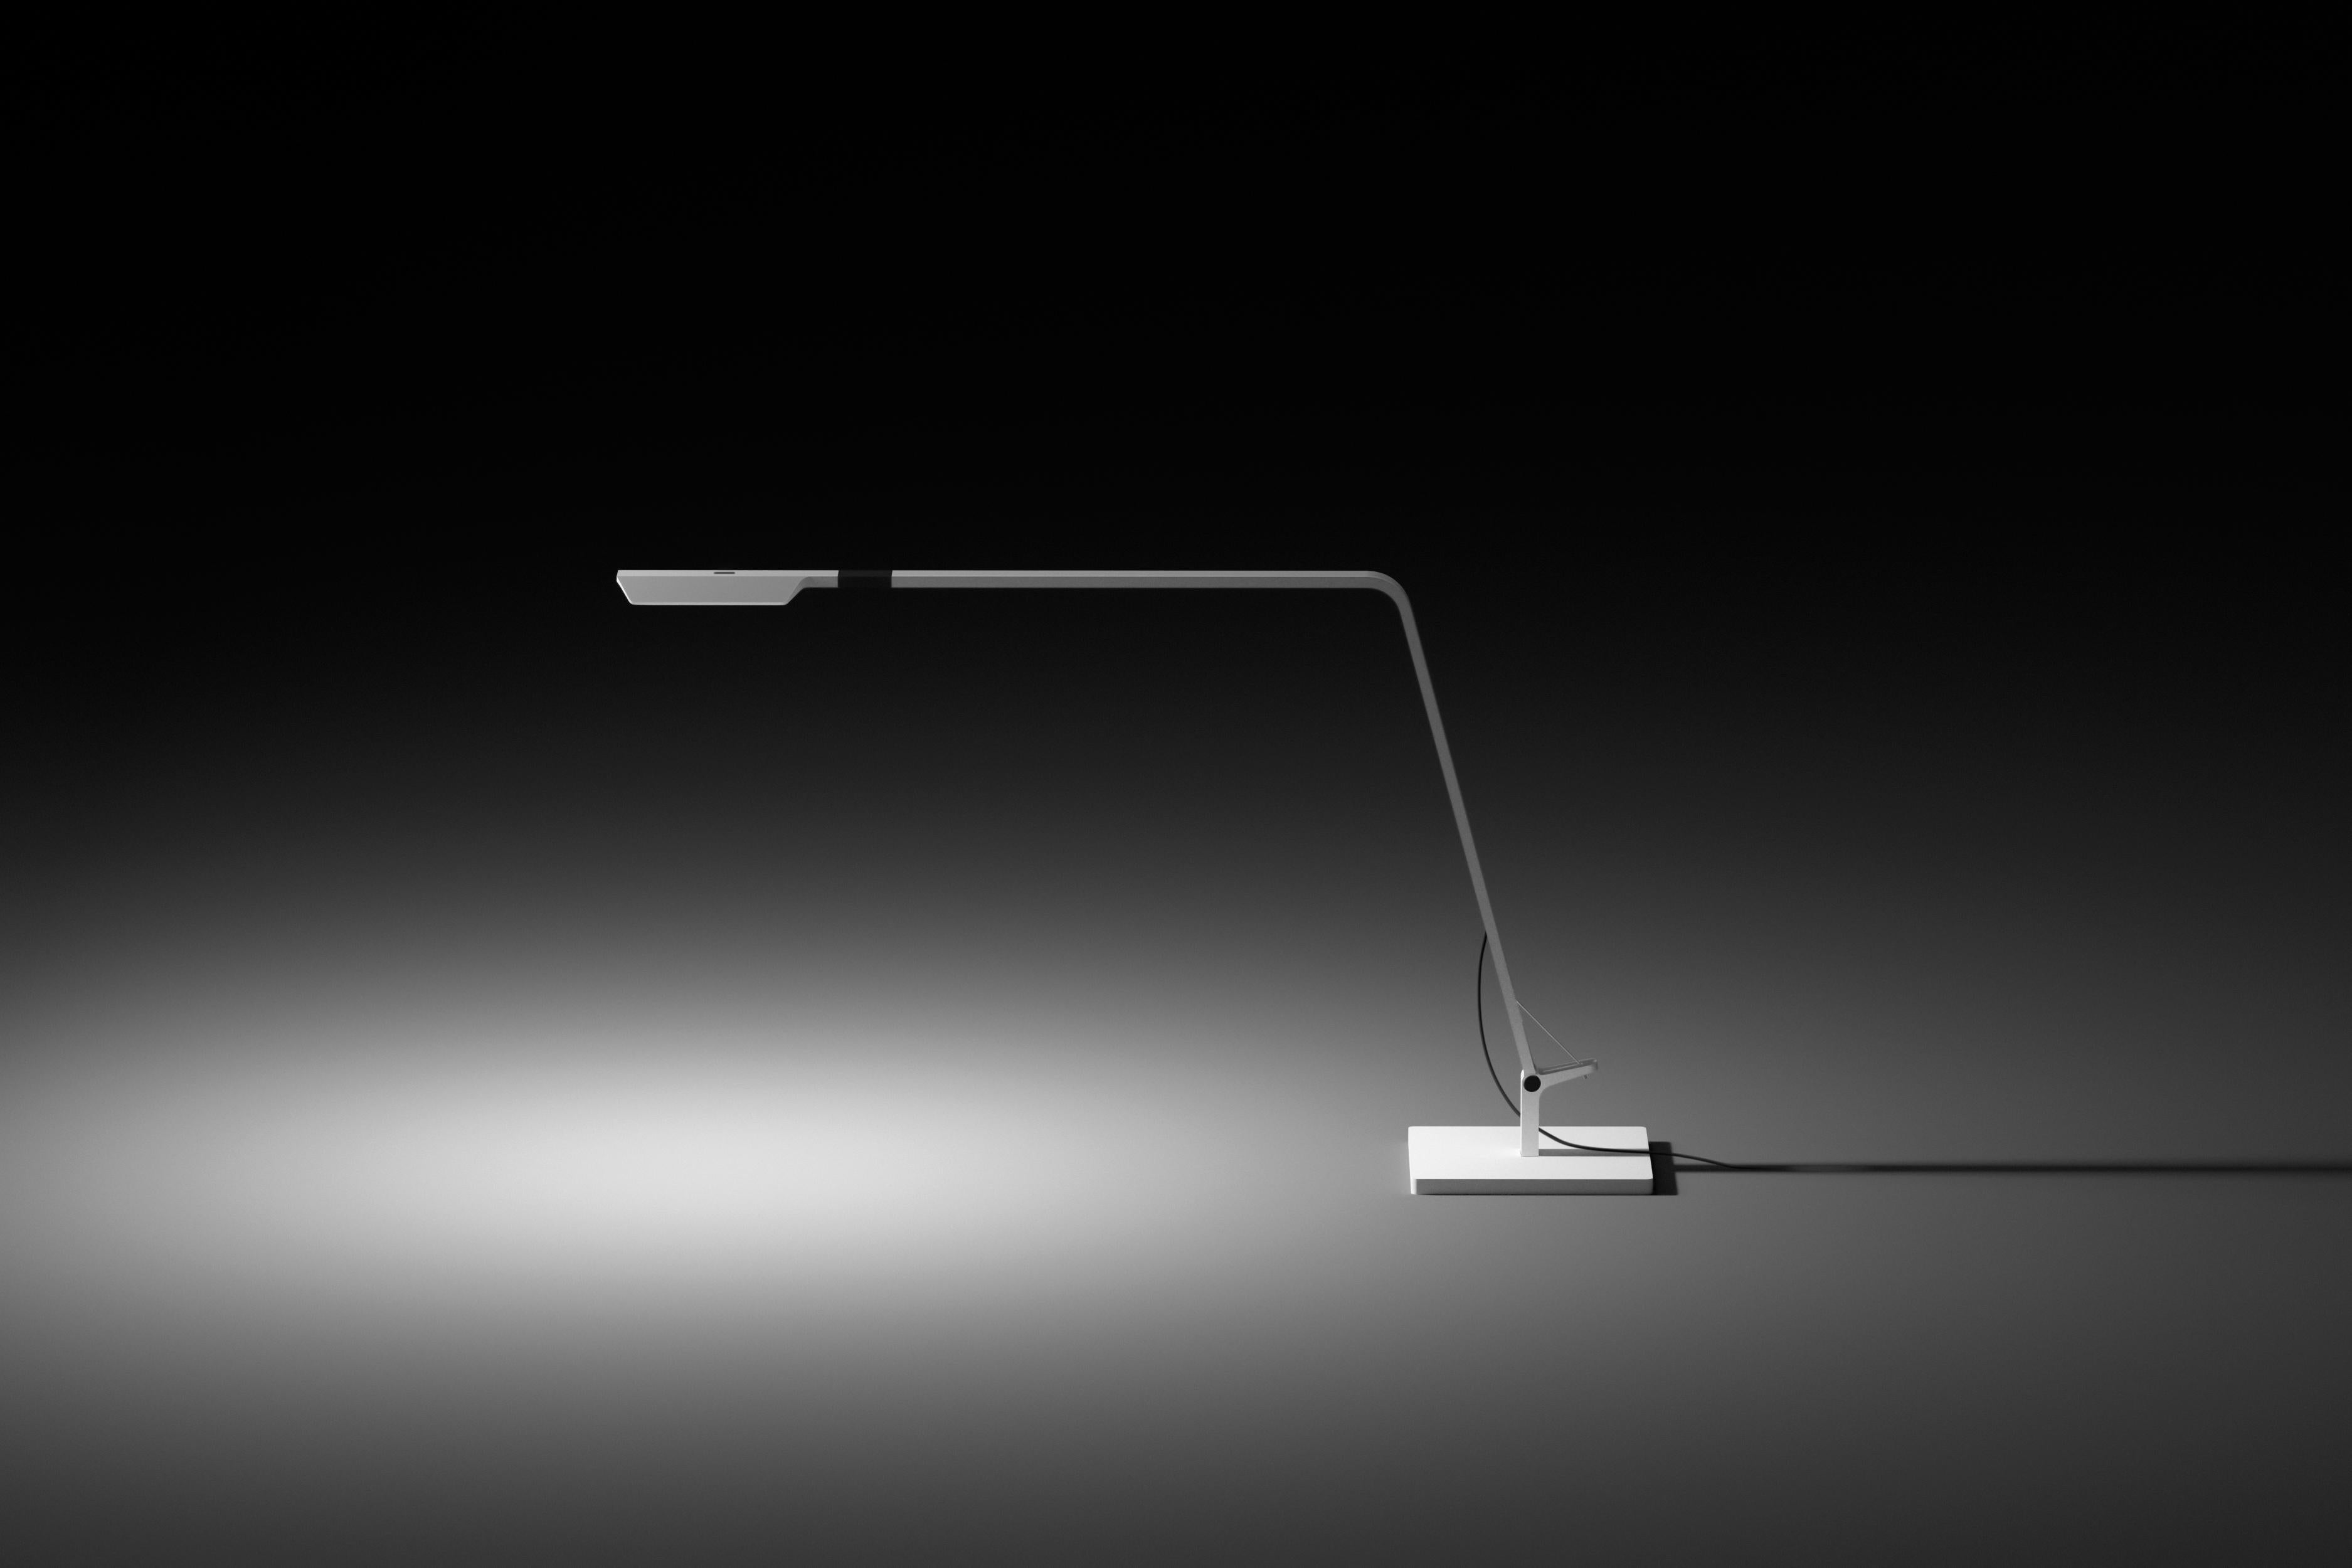 Subtle beauty for contemporary work spaces. Flex is a fully adjustable task-driven table lamp. Its sleek, low profile design, and flexible head make it the perfect balance of form and function. Designed by Ramos & Bassols. Available in a white or